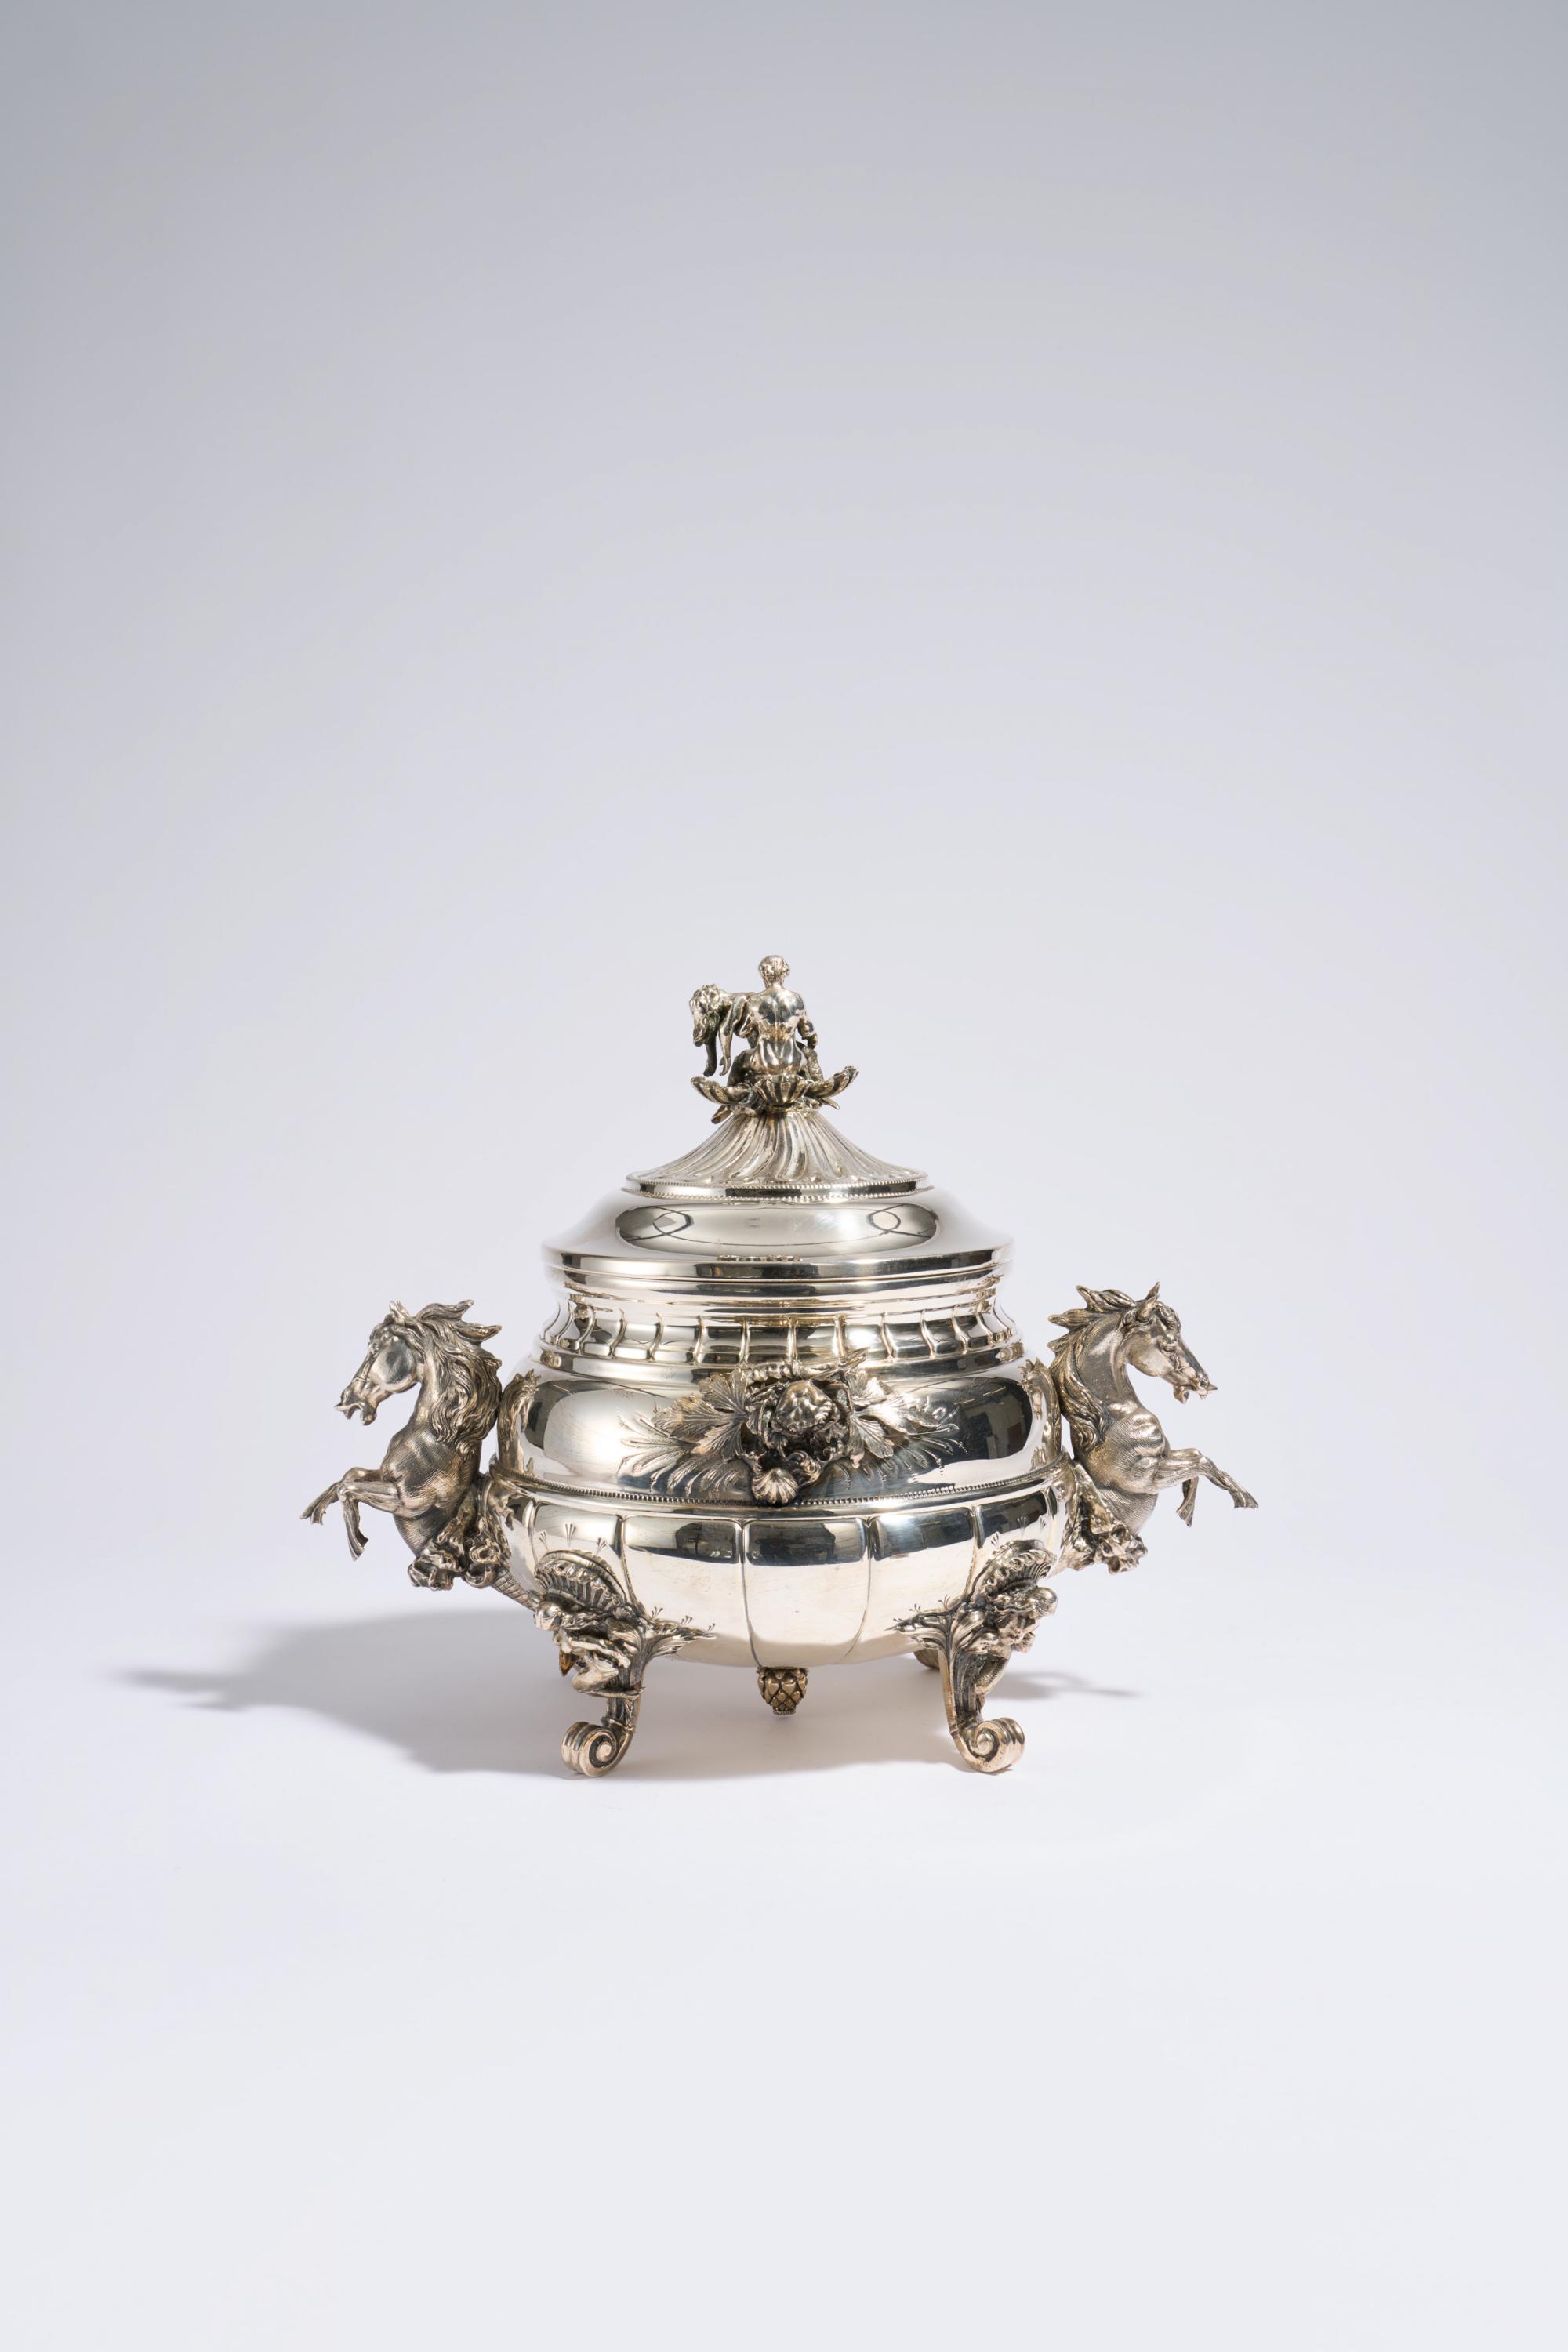 Magnificent tureen with hippocamps - Image 3 of 12